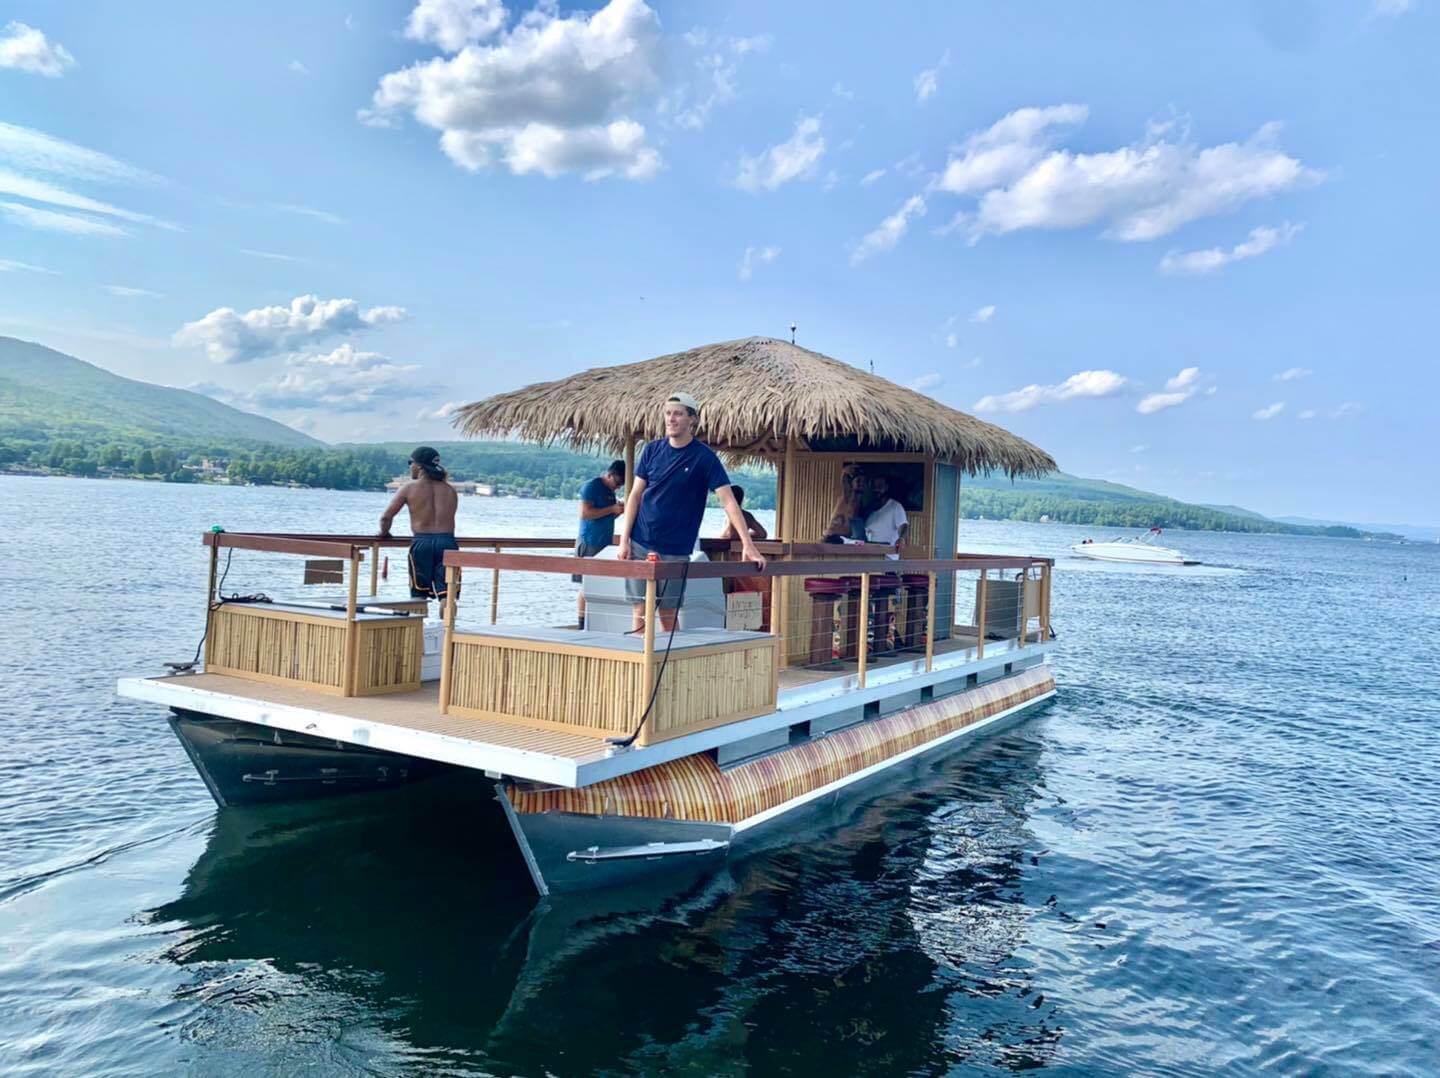 Tiki Tours Adds New Boat Lake George Regional Chamber Of Commerce And Cvb